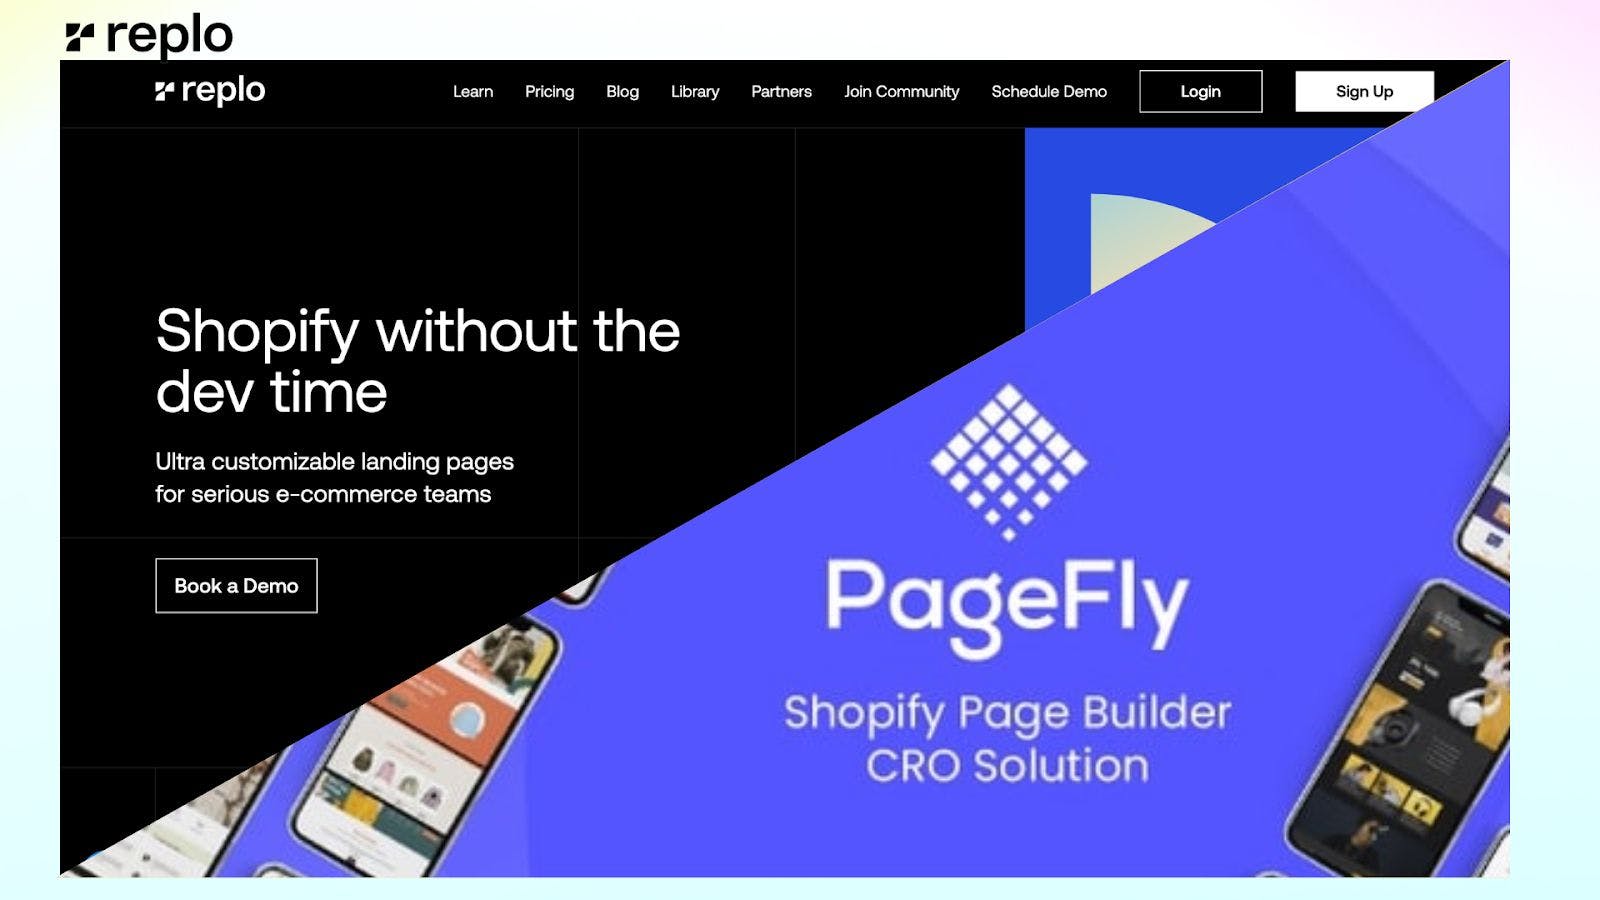 Pagefly vs. Replo: What’s The Difference?